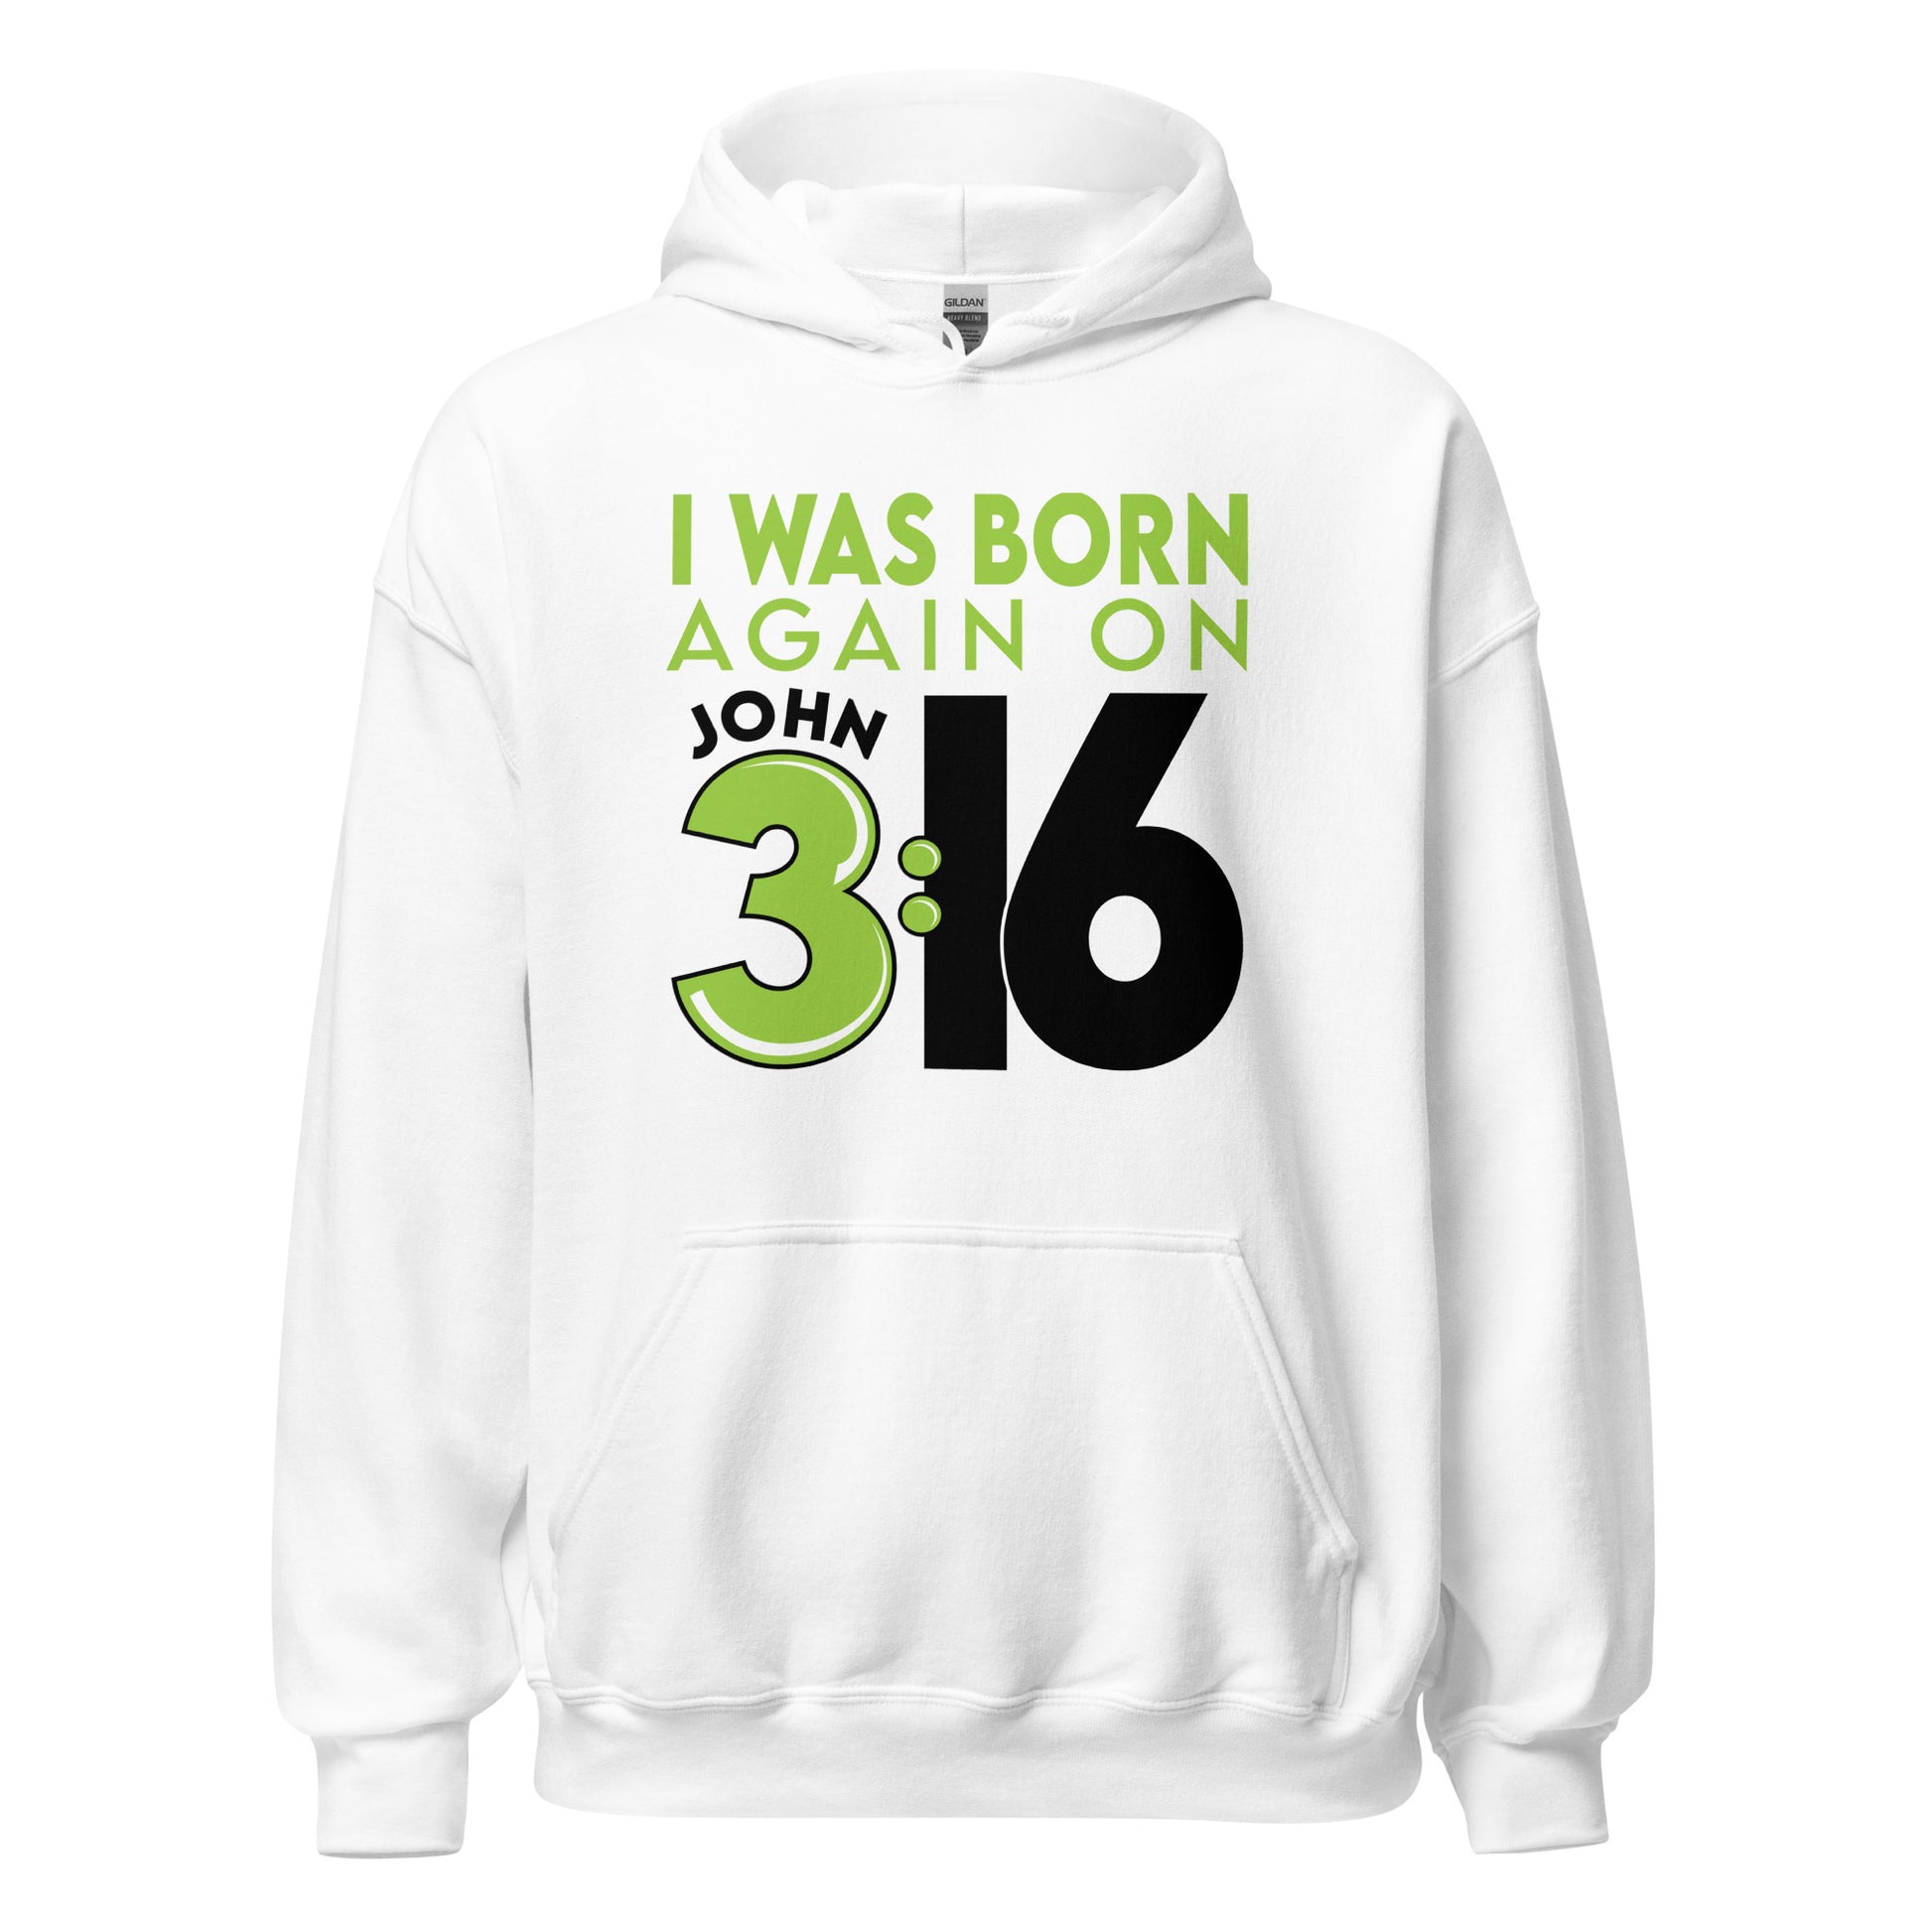 White Unisex Cozy Hoodie with Christian aesthetic bible verse message that says, "I Was Born Again On John 3:16" bible verse quote in lime green and white for men and women